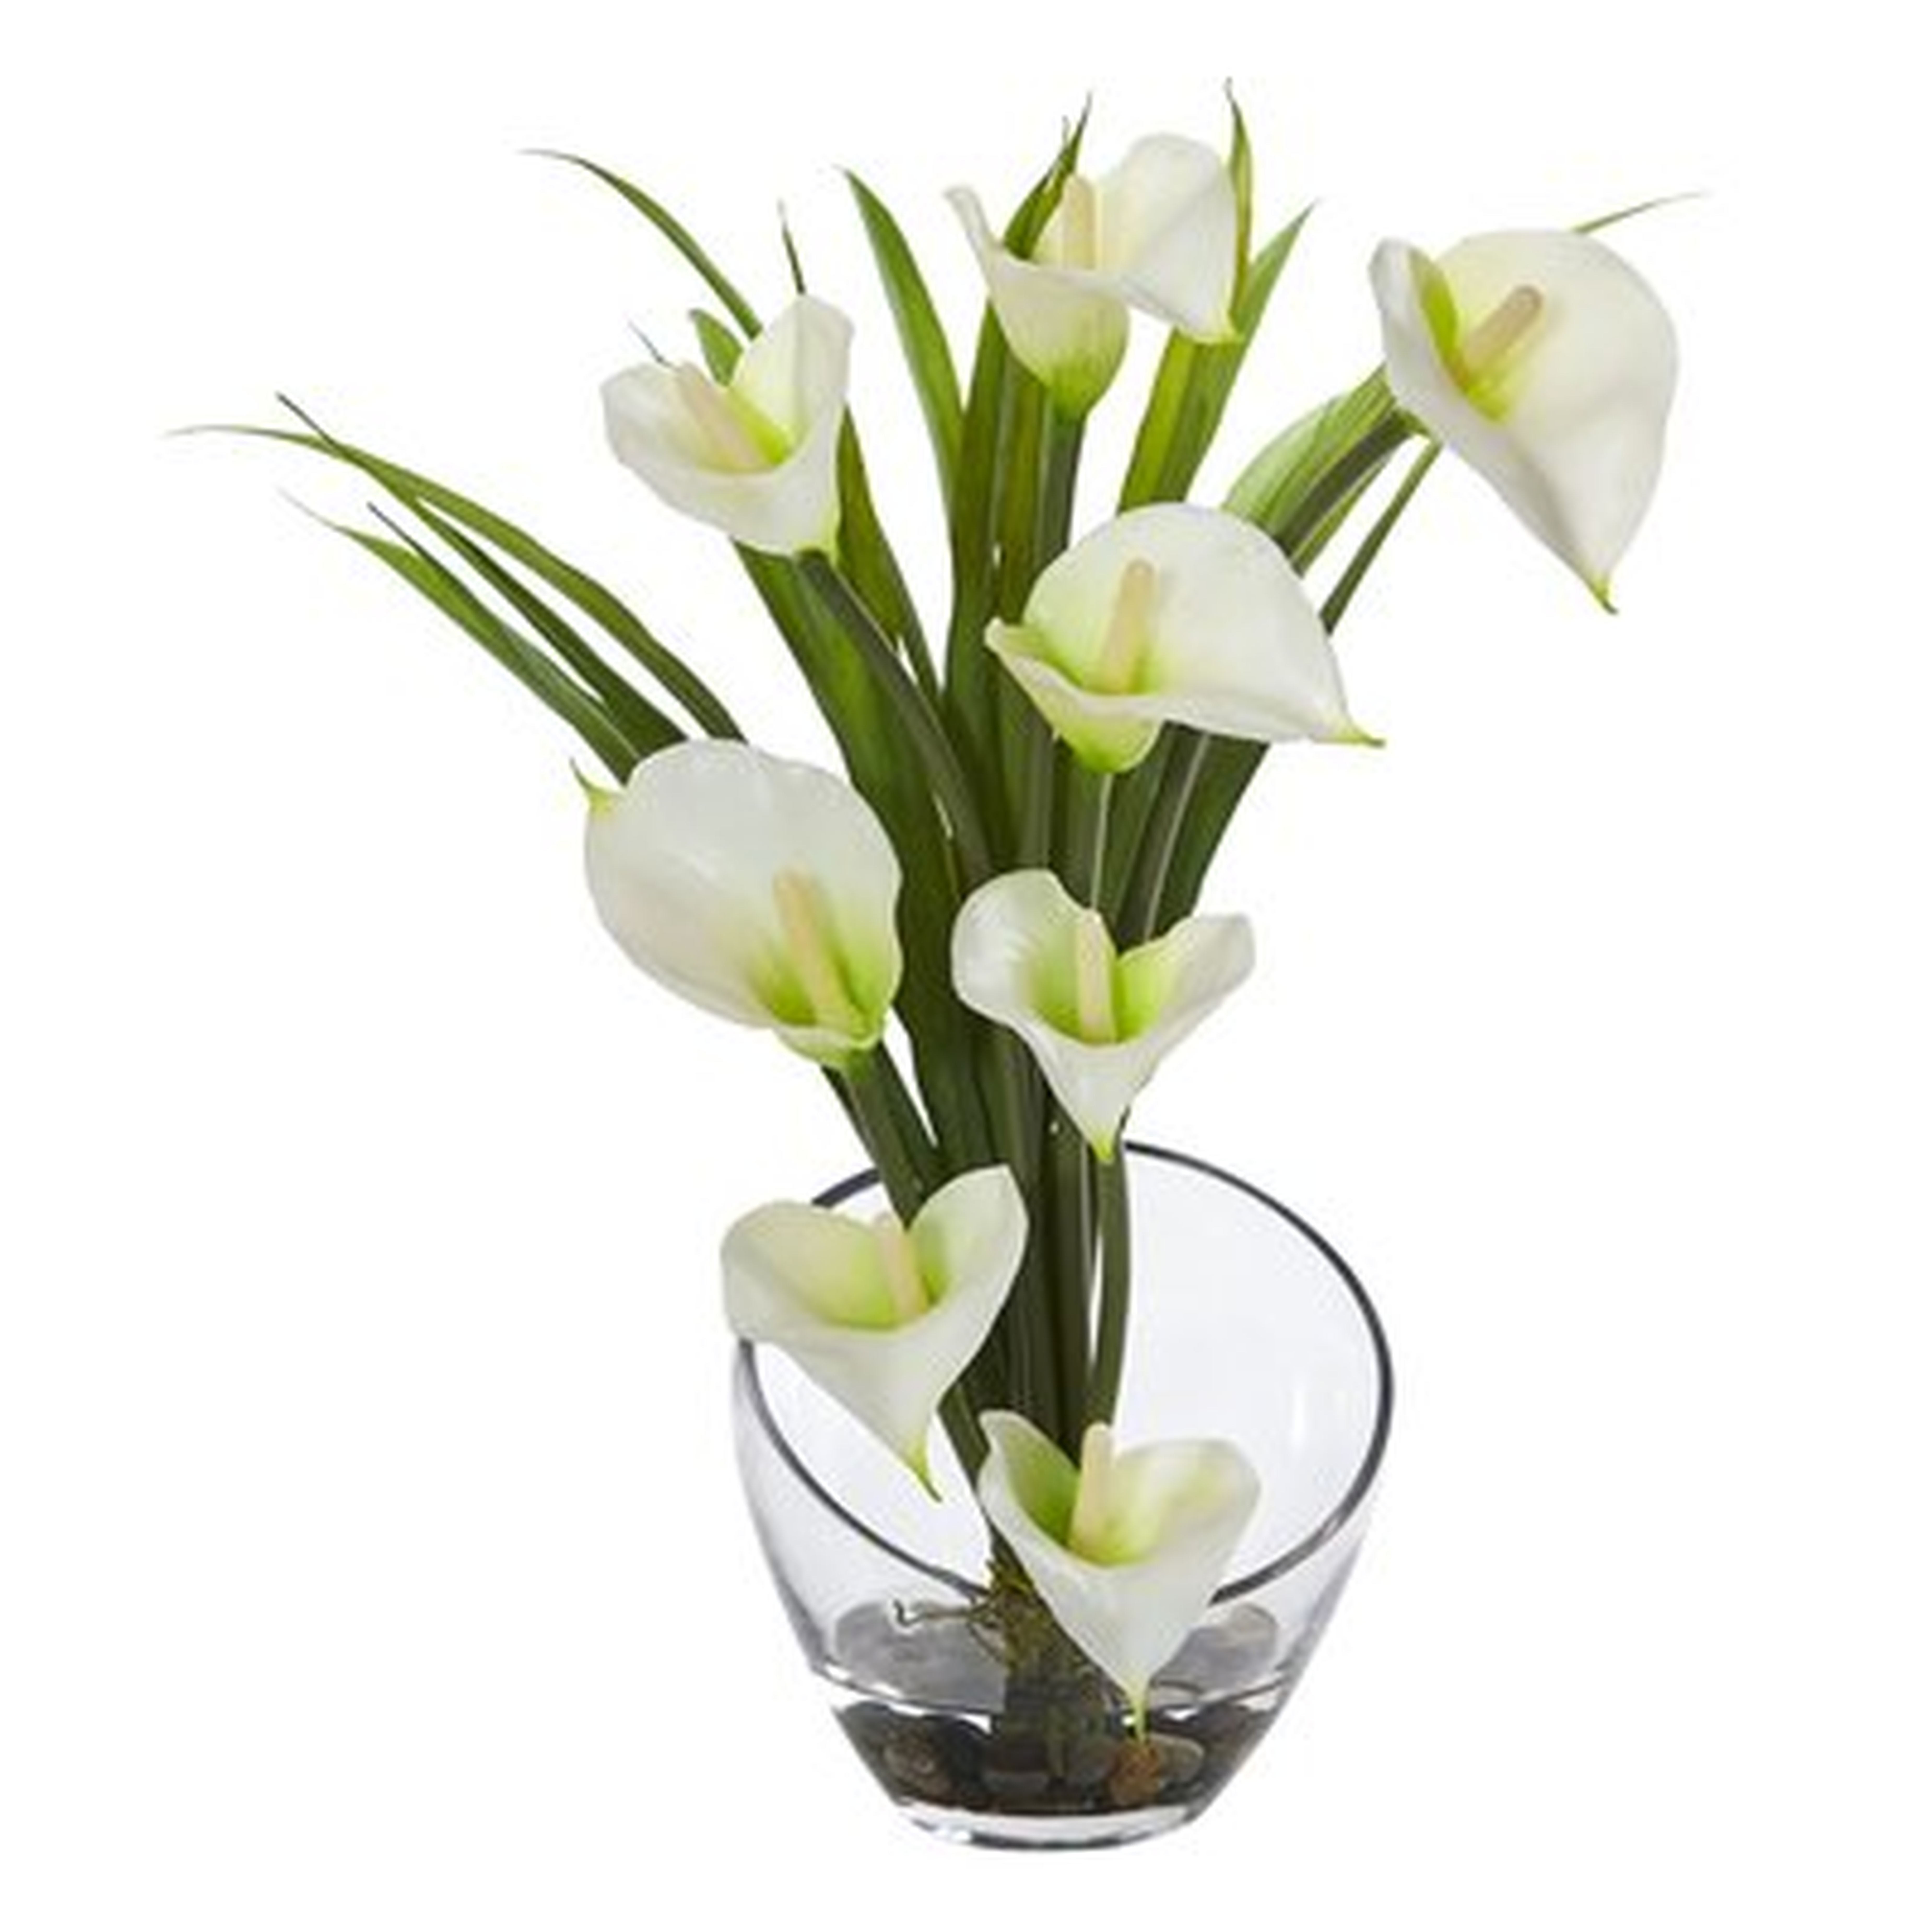 Calla Lily and Grass Artificial Floral Arrangement in Vase - Birch Lane